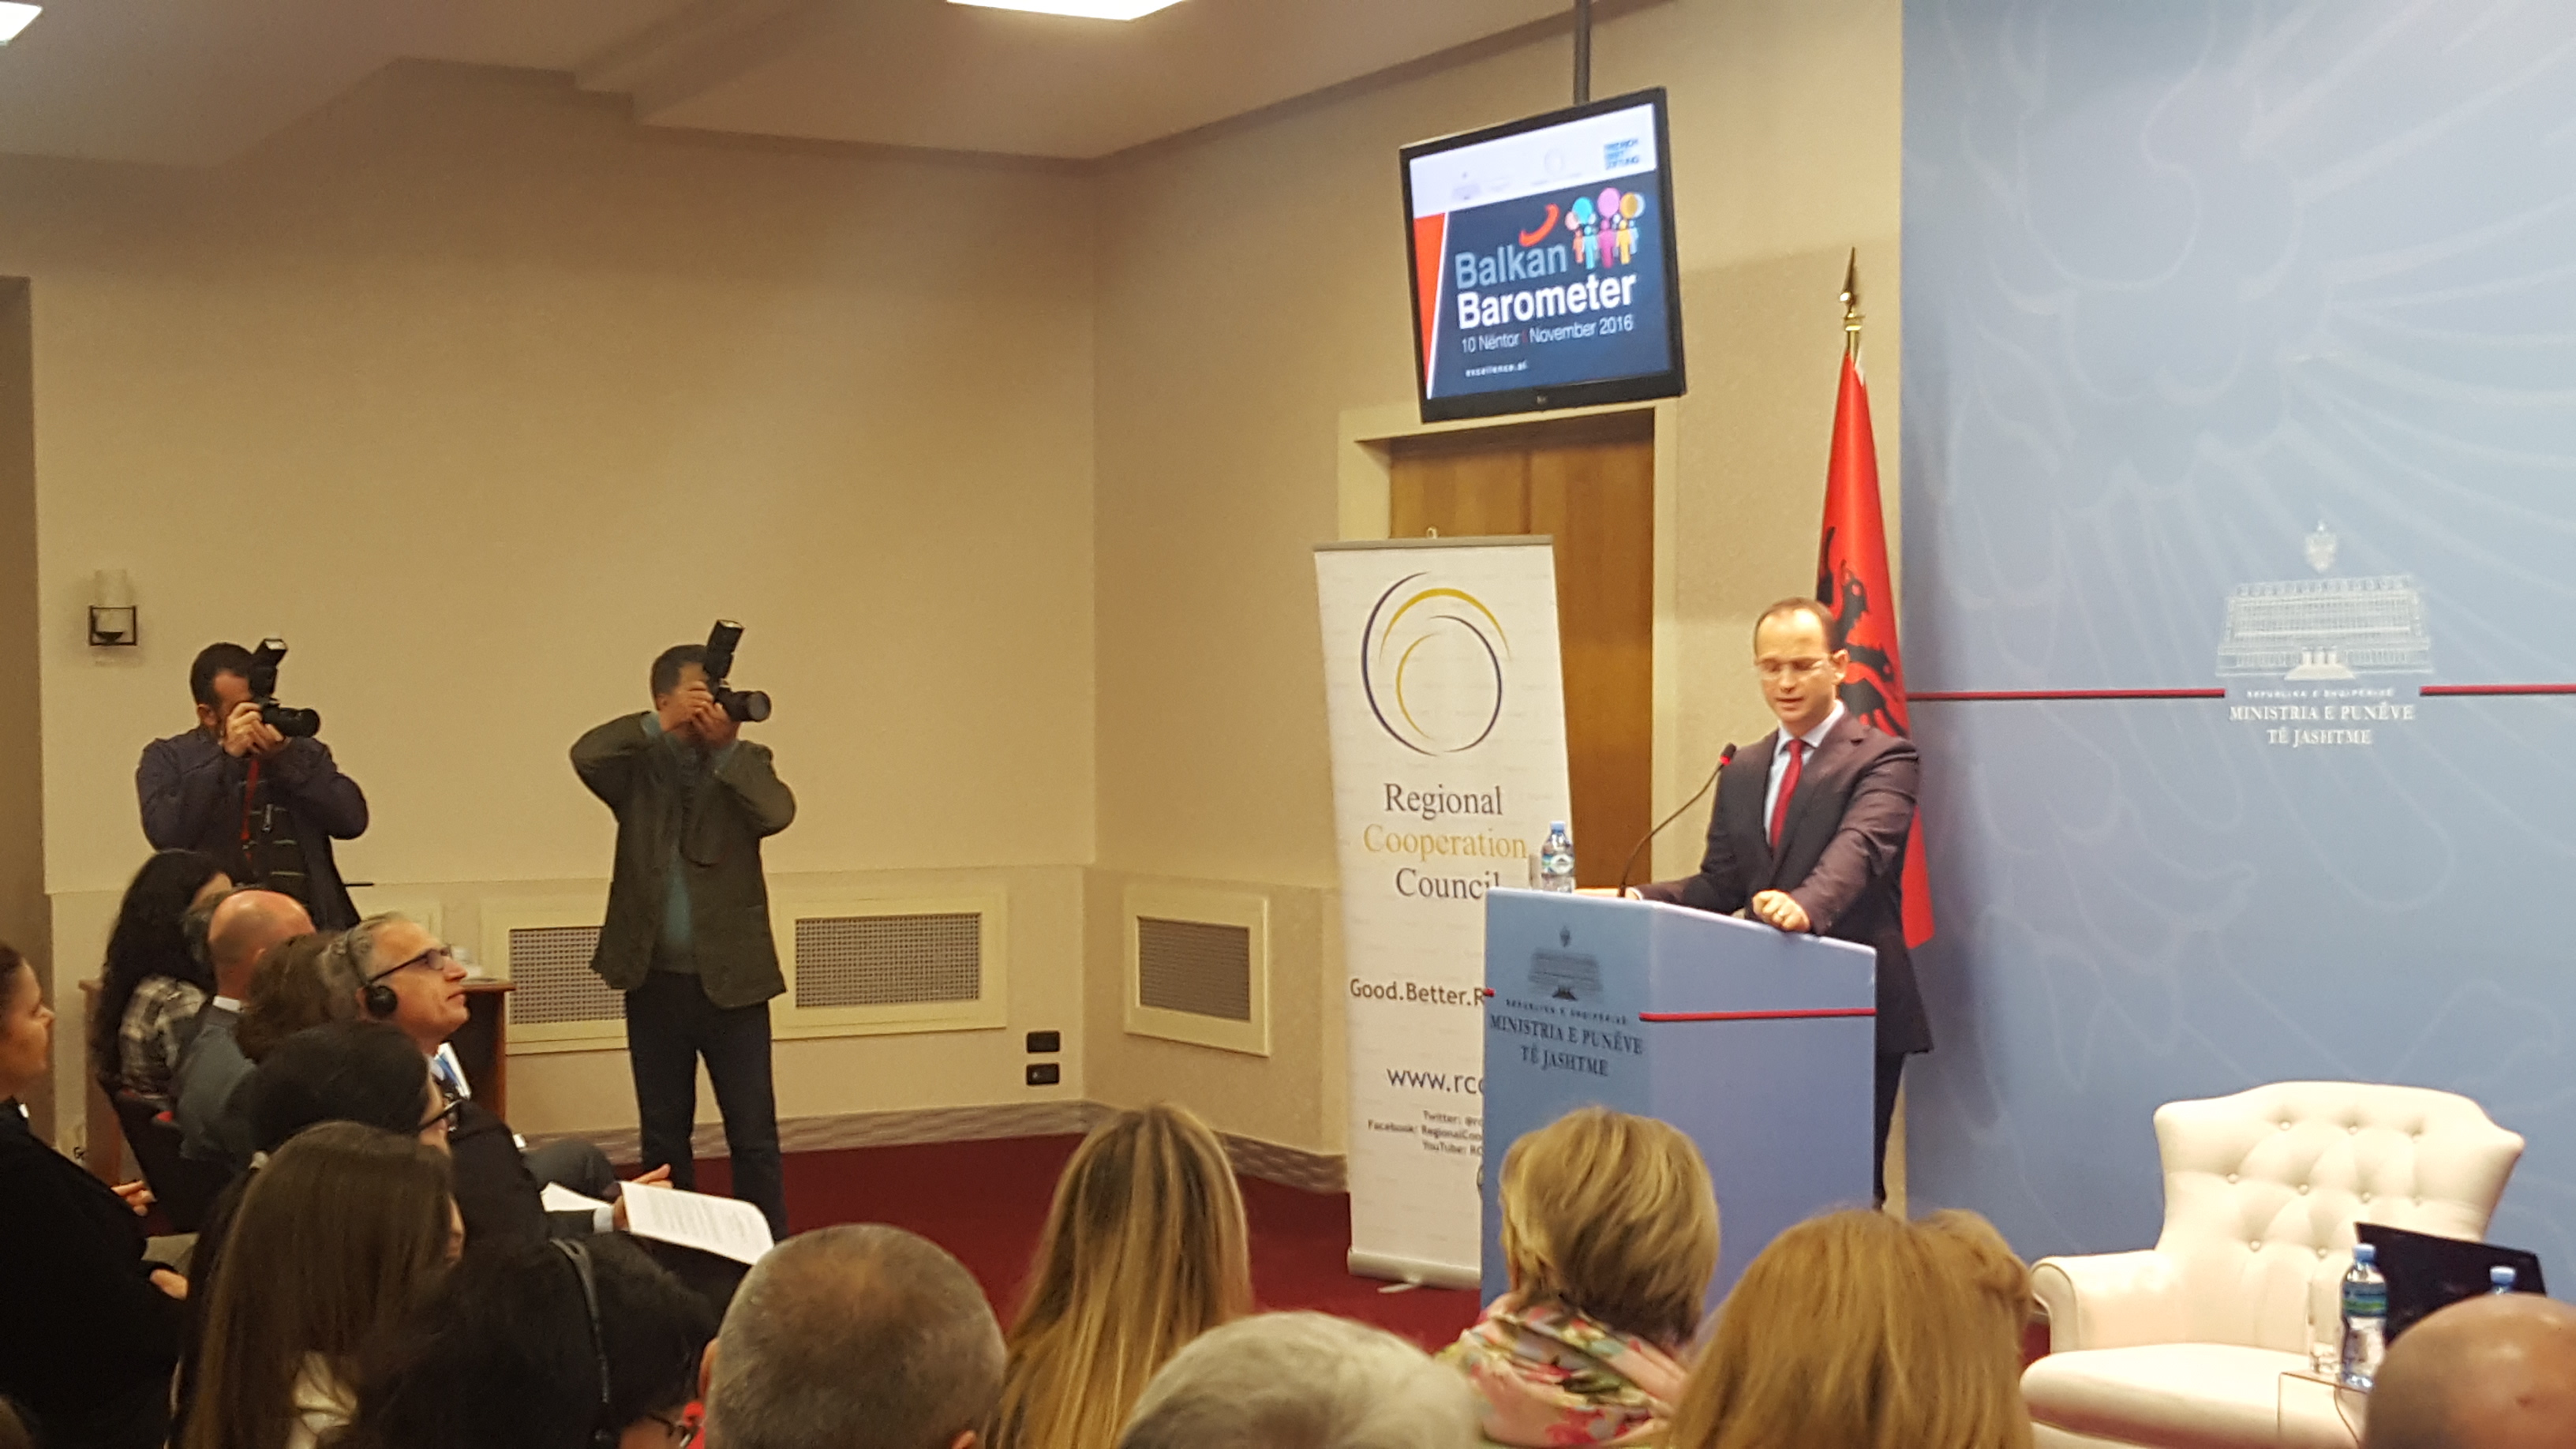 Albanian Minister of Foreign Affairs, Ditmir Bushati, presenting the findings of Balkan barometer 2016 about the sentiments of Albanian general public on EU integration, at the Balkan Barometer 2016 presentation held in Tirana on 10 November 2016 (Photo: RCC/Alma Arslanagic Pozder)